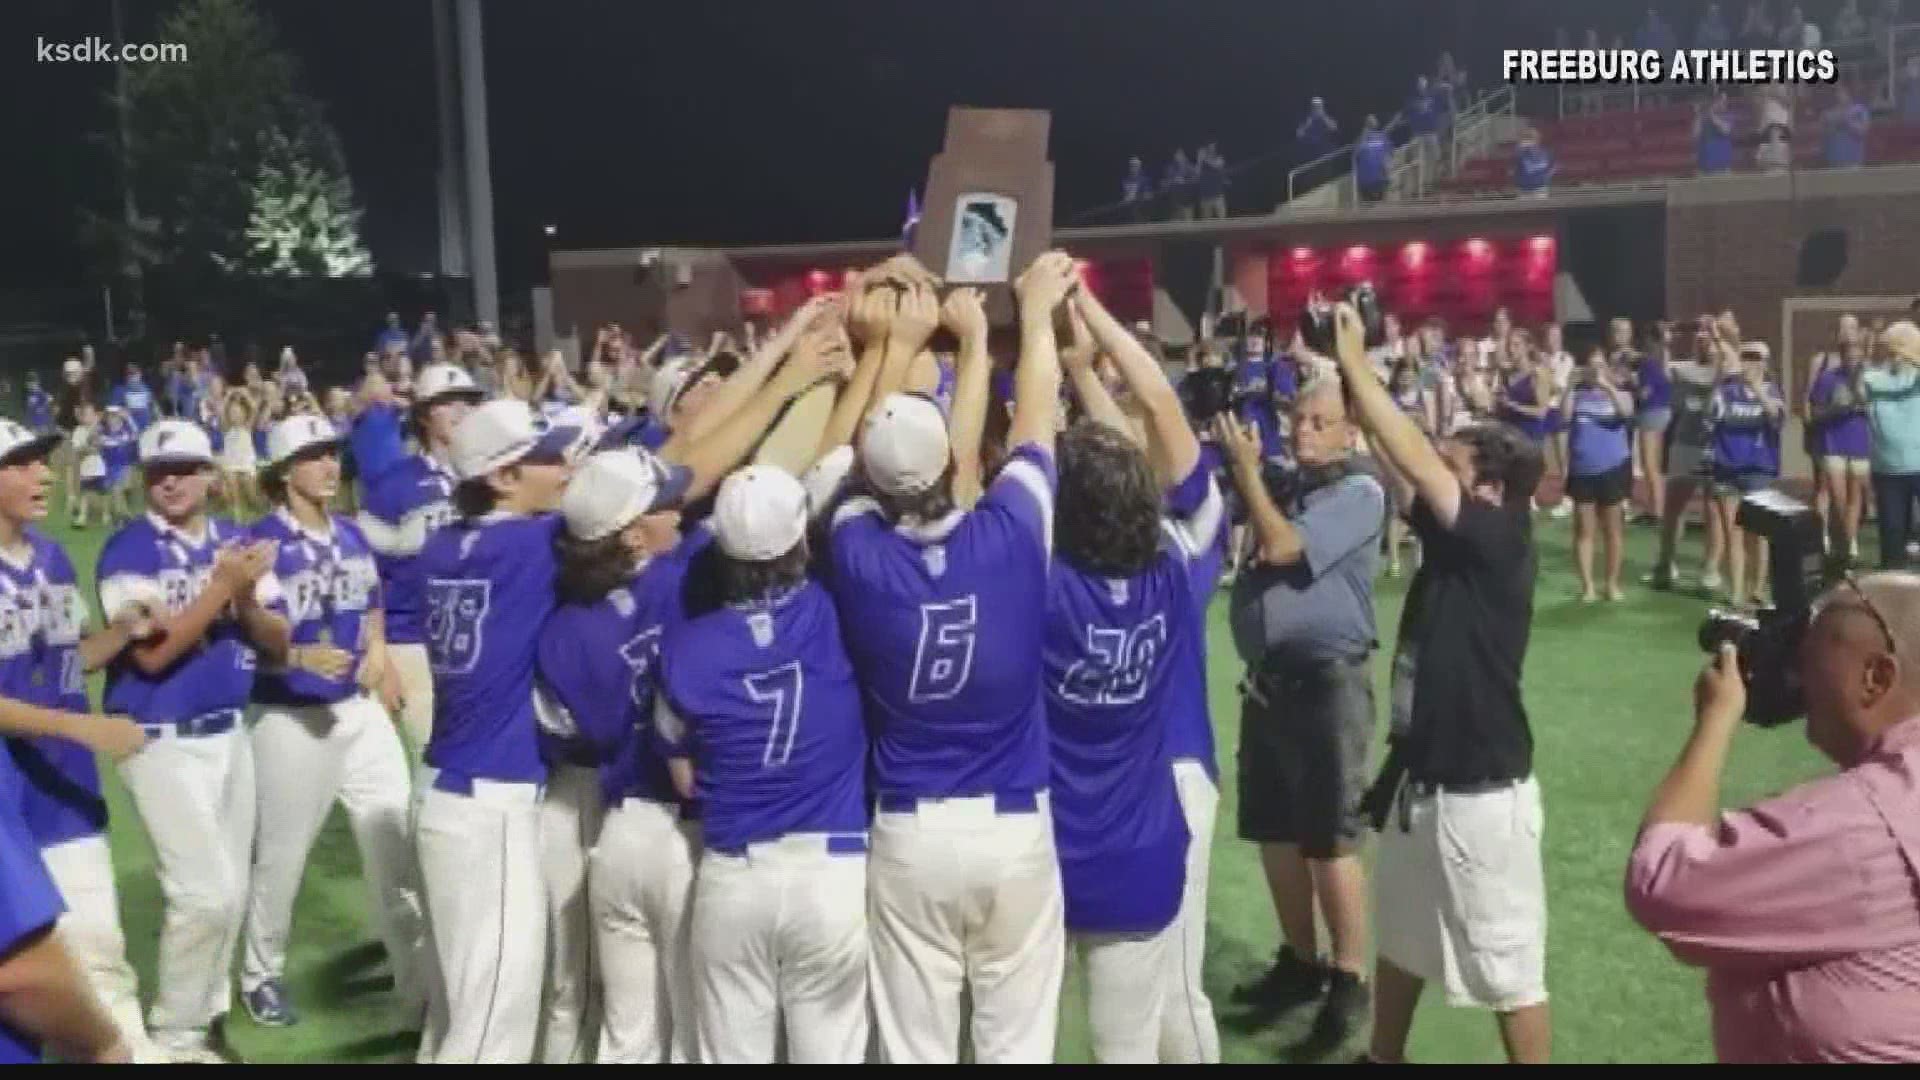 Freeburg captured its first state championship since 1989.